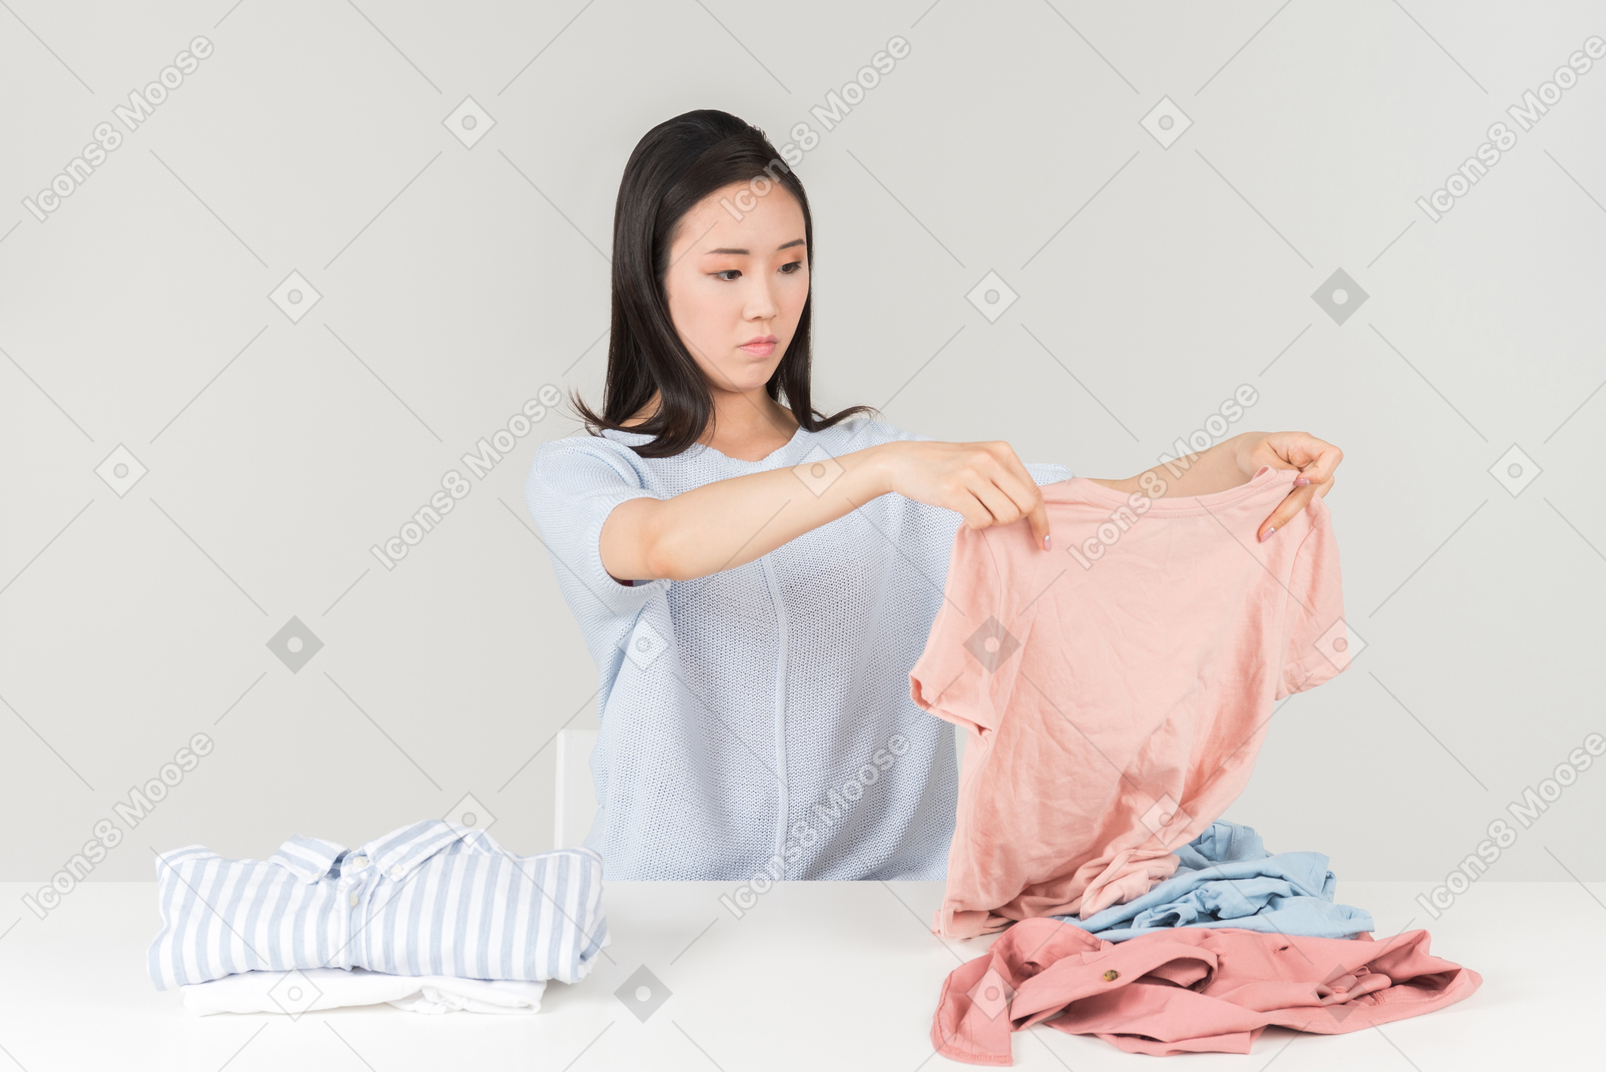 That moment when you get hit by the existential crisis in the middle of folding your clothes